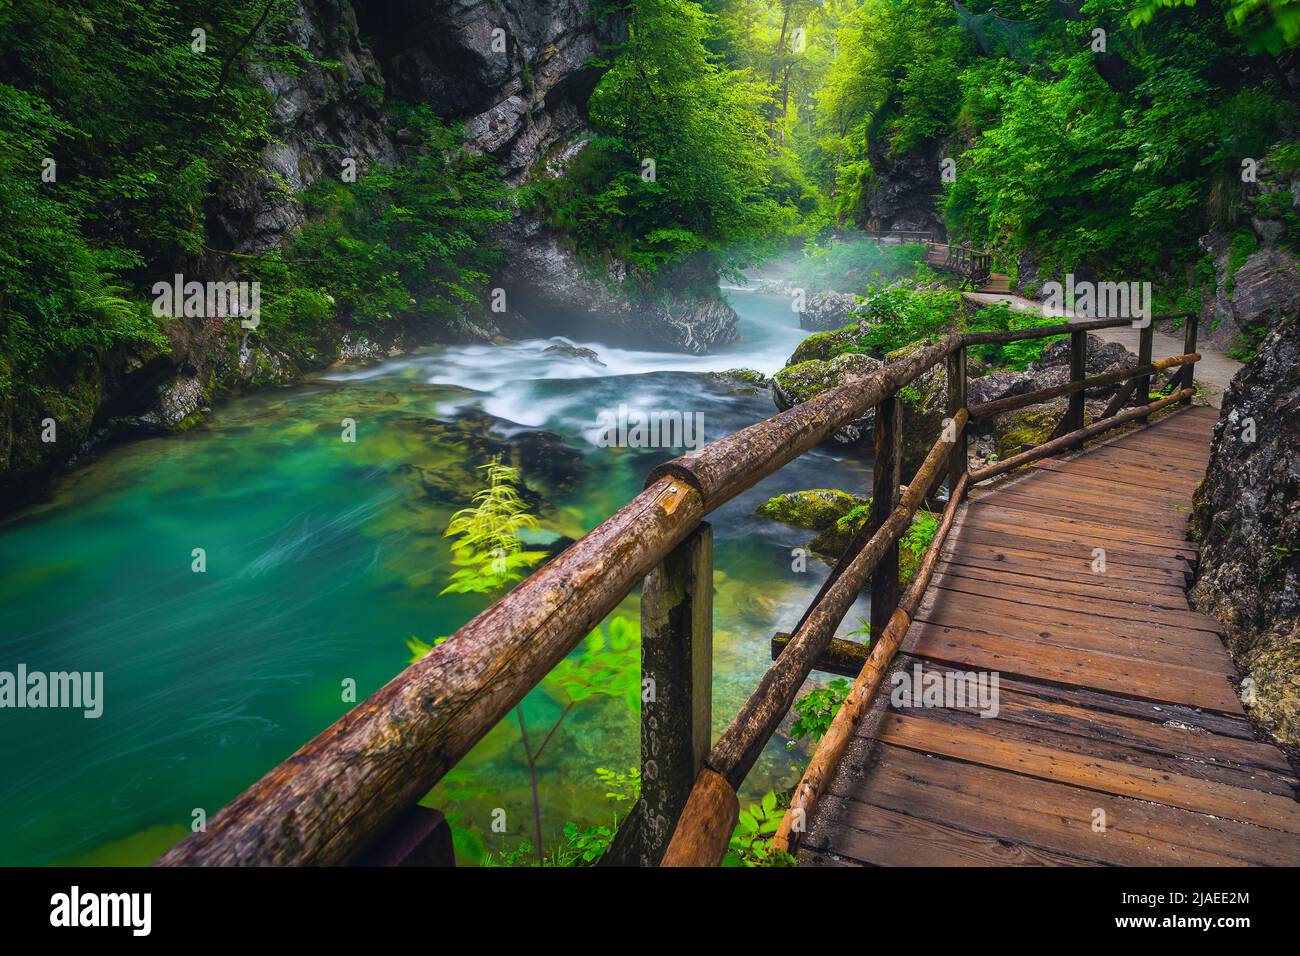 Touristic wooden footbridge in the misty Vintgar gorge. Admirable scenery with clean mountain river in the deep gorge, Bled, Slovenia, Europe Stock Photo